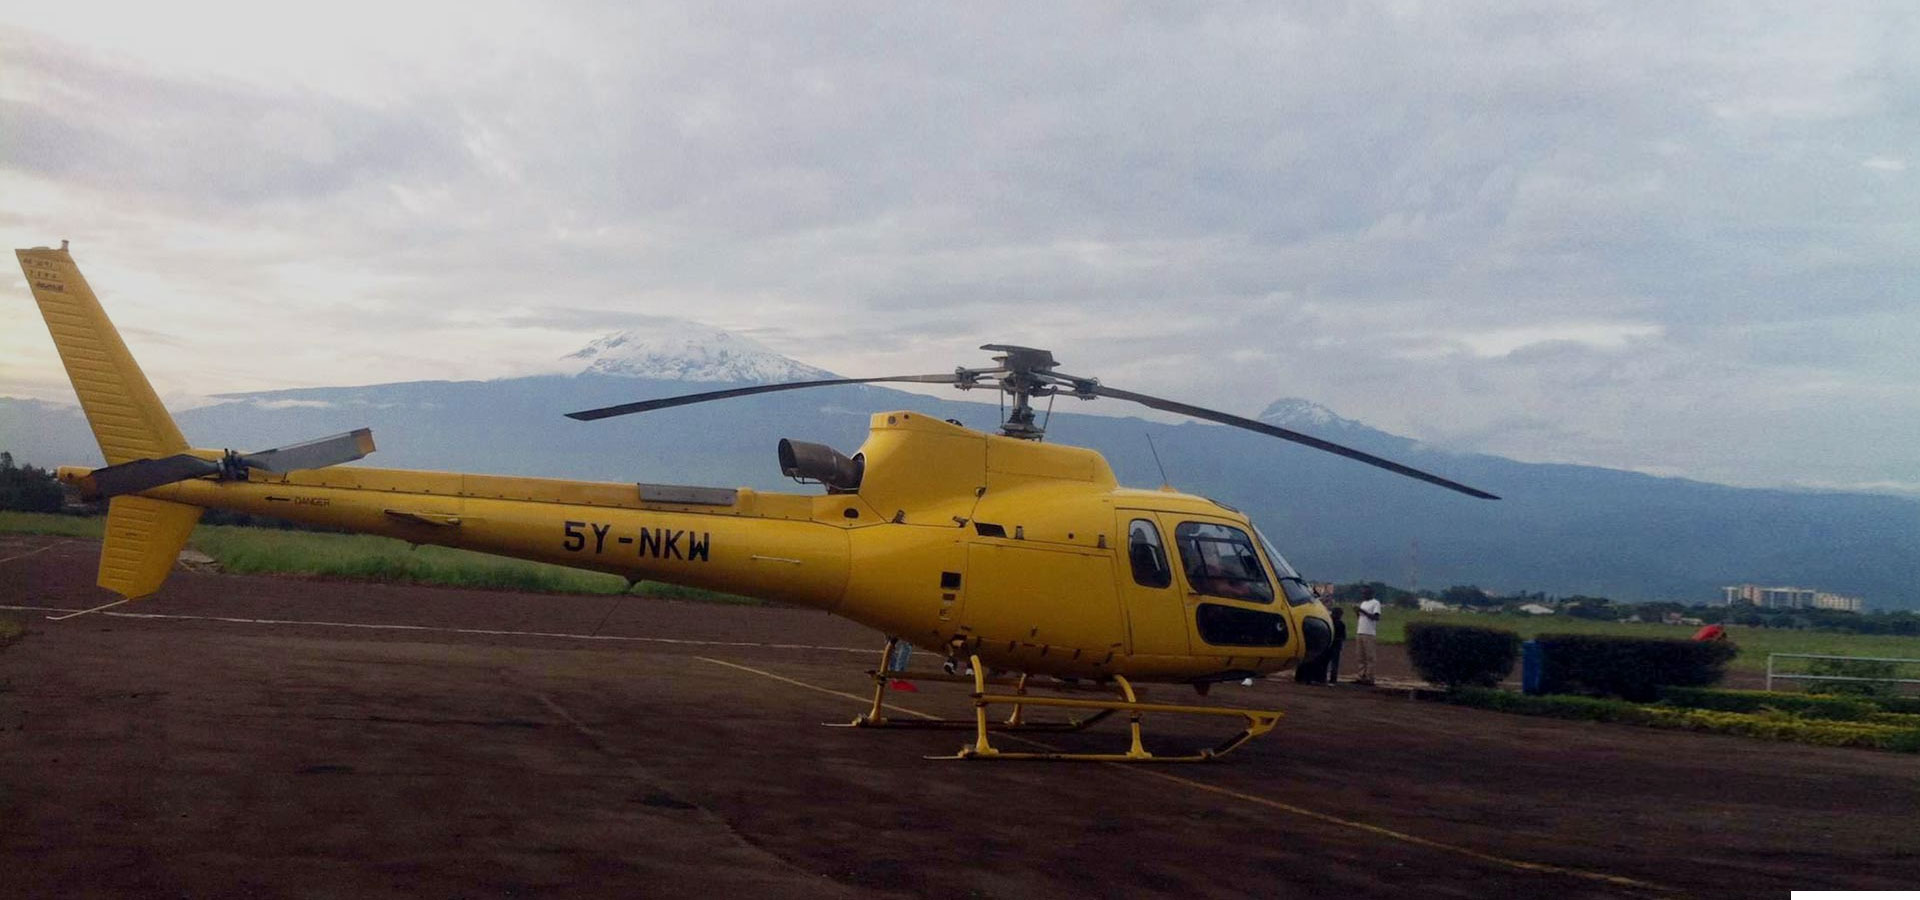 Swift Action and Heroism: The Rescue Evacuation on Mt. Kilimanjaro